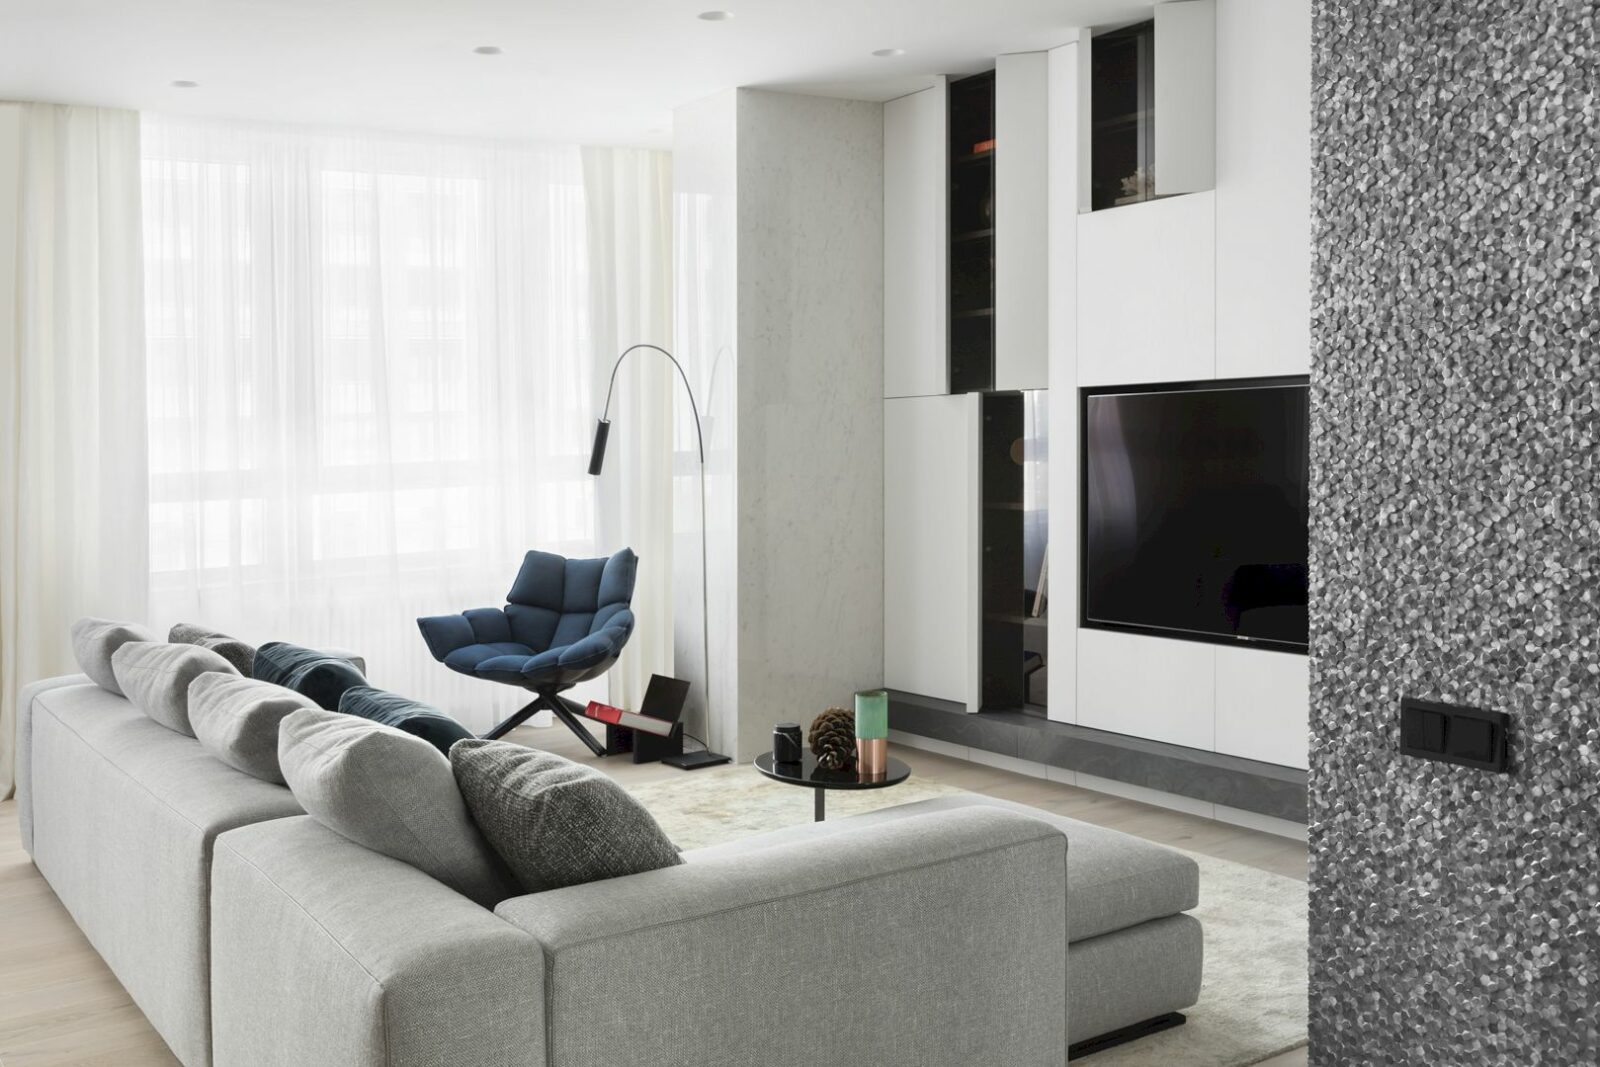 10 Minimalist Living Room Designs with Built-In TV Unit And Plenty Of ...